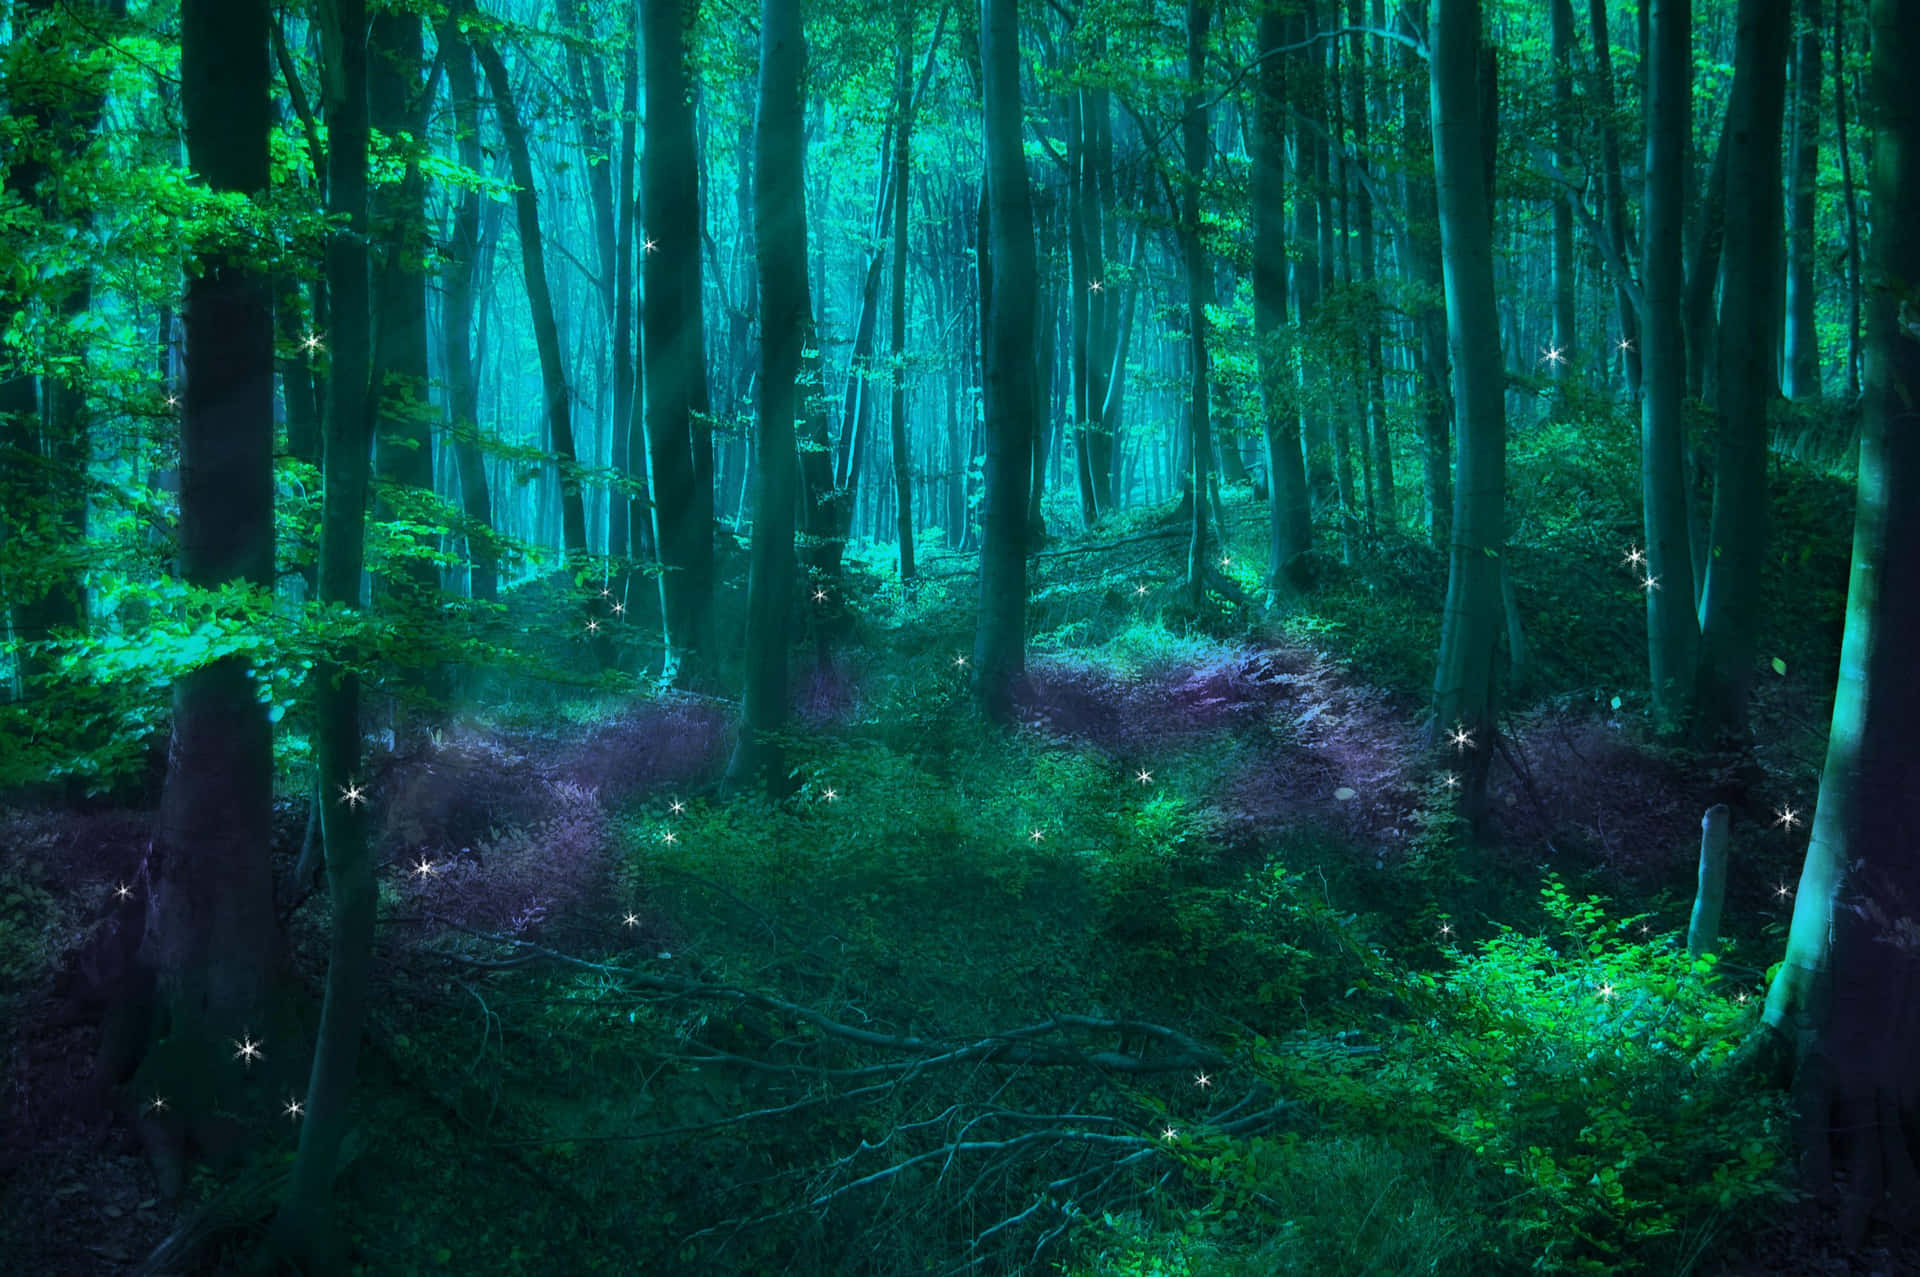 A magical forest landscape with warm sunlight and dreamy nature scenery Wallpaper